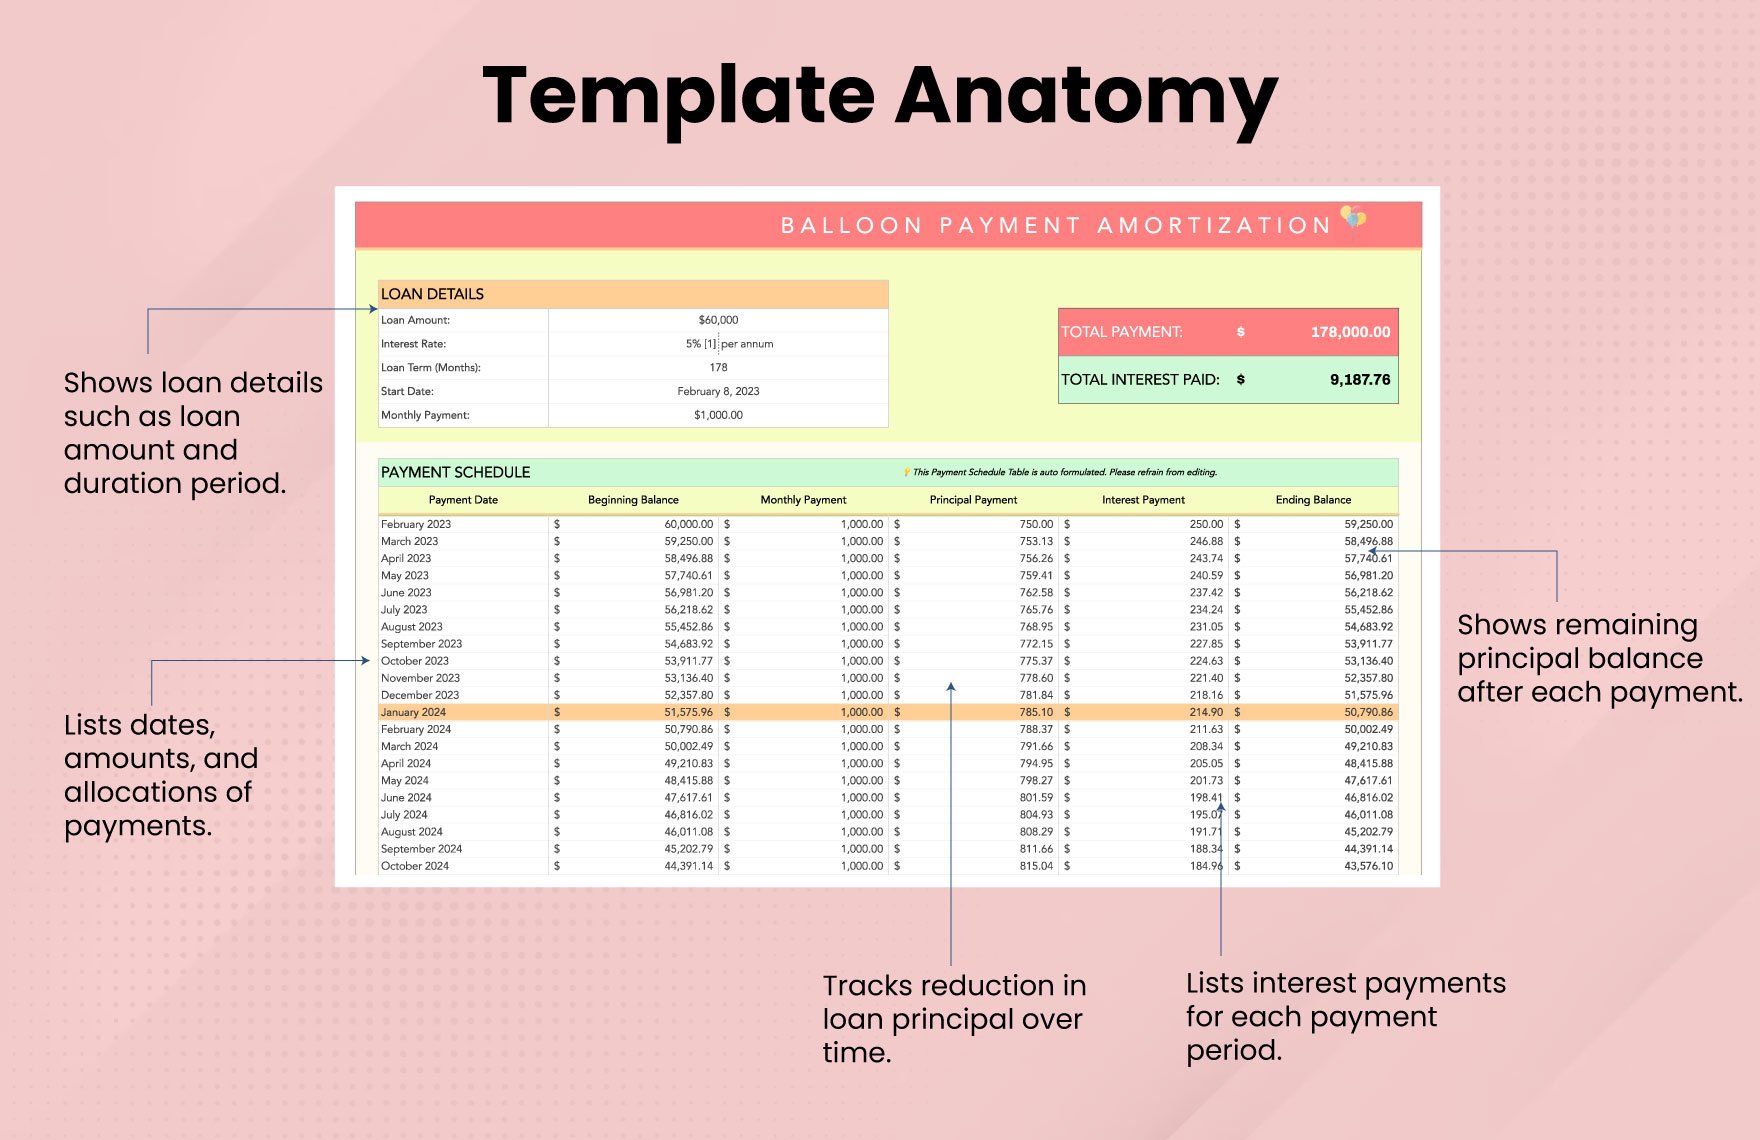 Balloon Payment Amortization Schedule Template